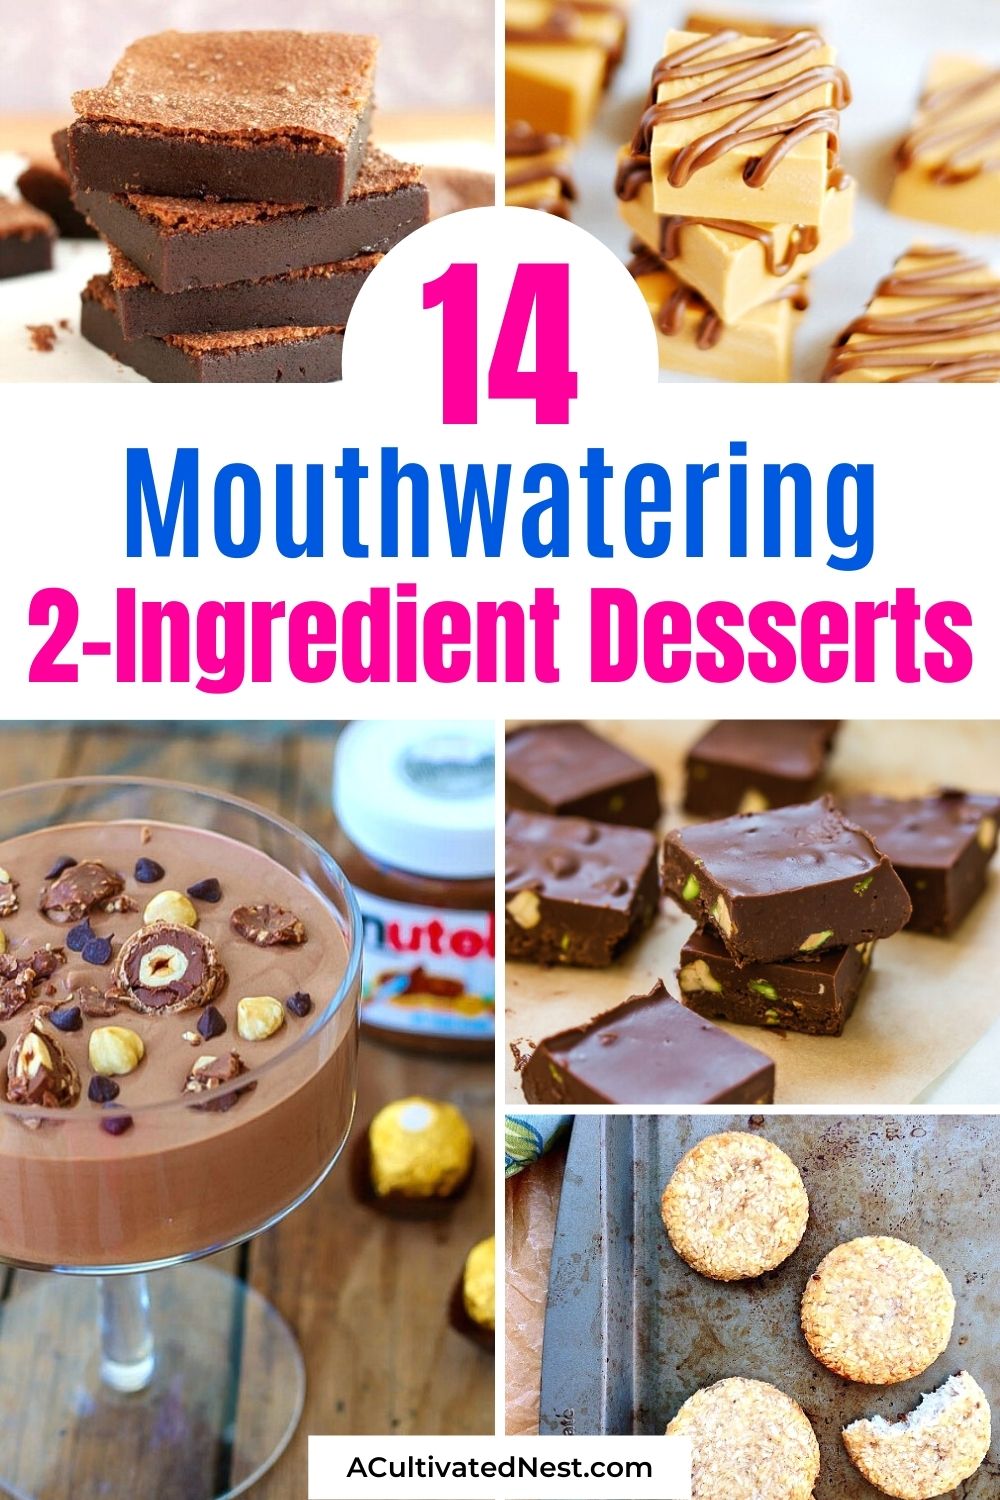 14 Mouth-Watering 2-Ingredient Desserts- Make something easy and delicious to satisfy your sweet tooth with these mouthwatering 2-ingredient dessert recipes! | #desserts #dessertRecipes #recipes #easyDesserts #ACultivatedNest